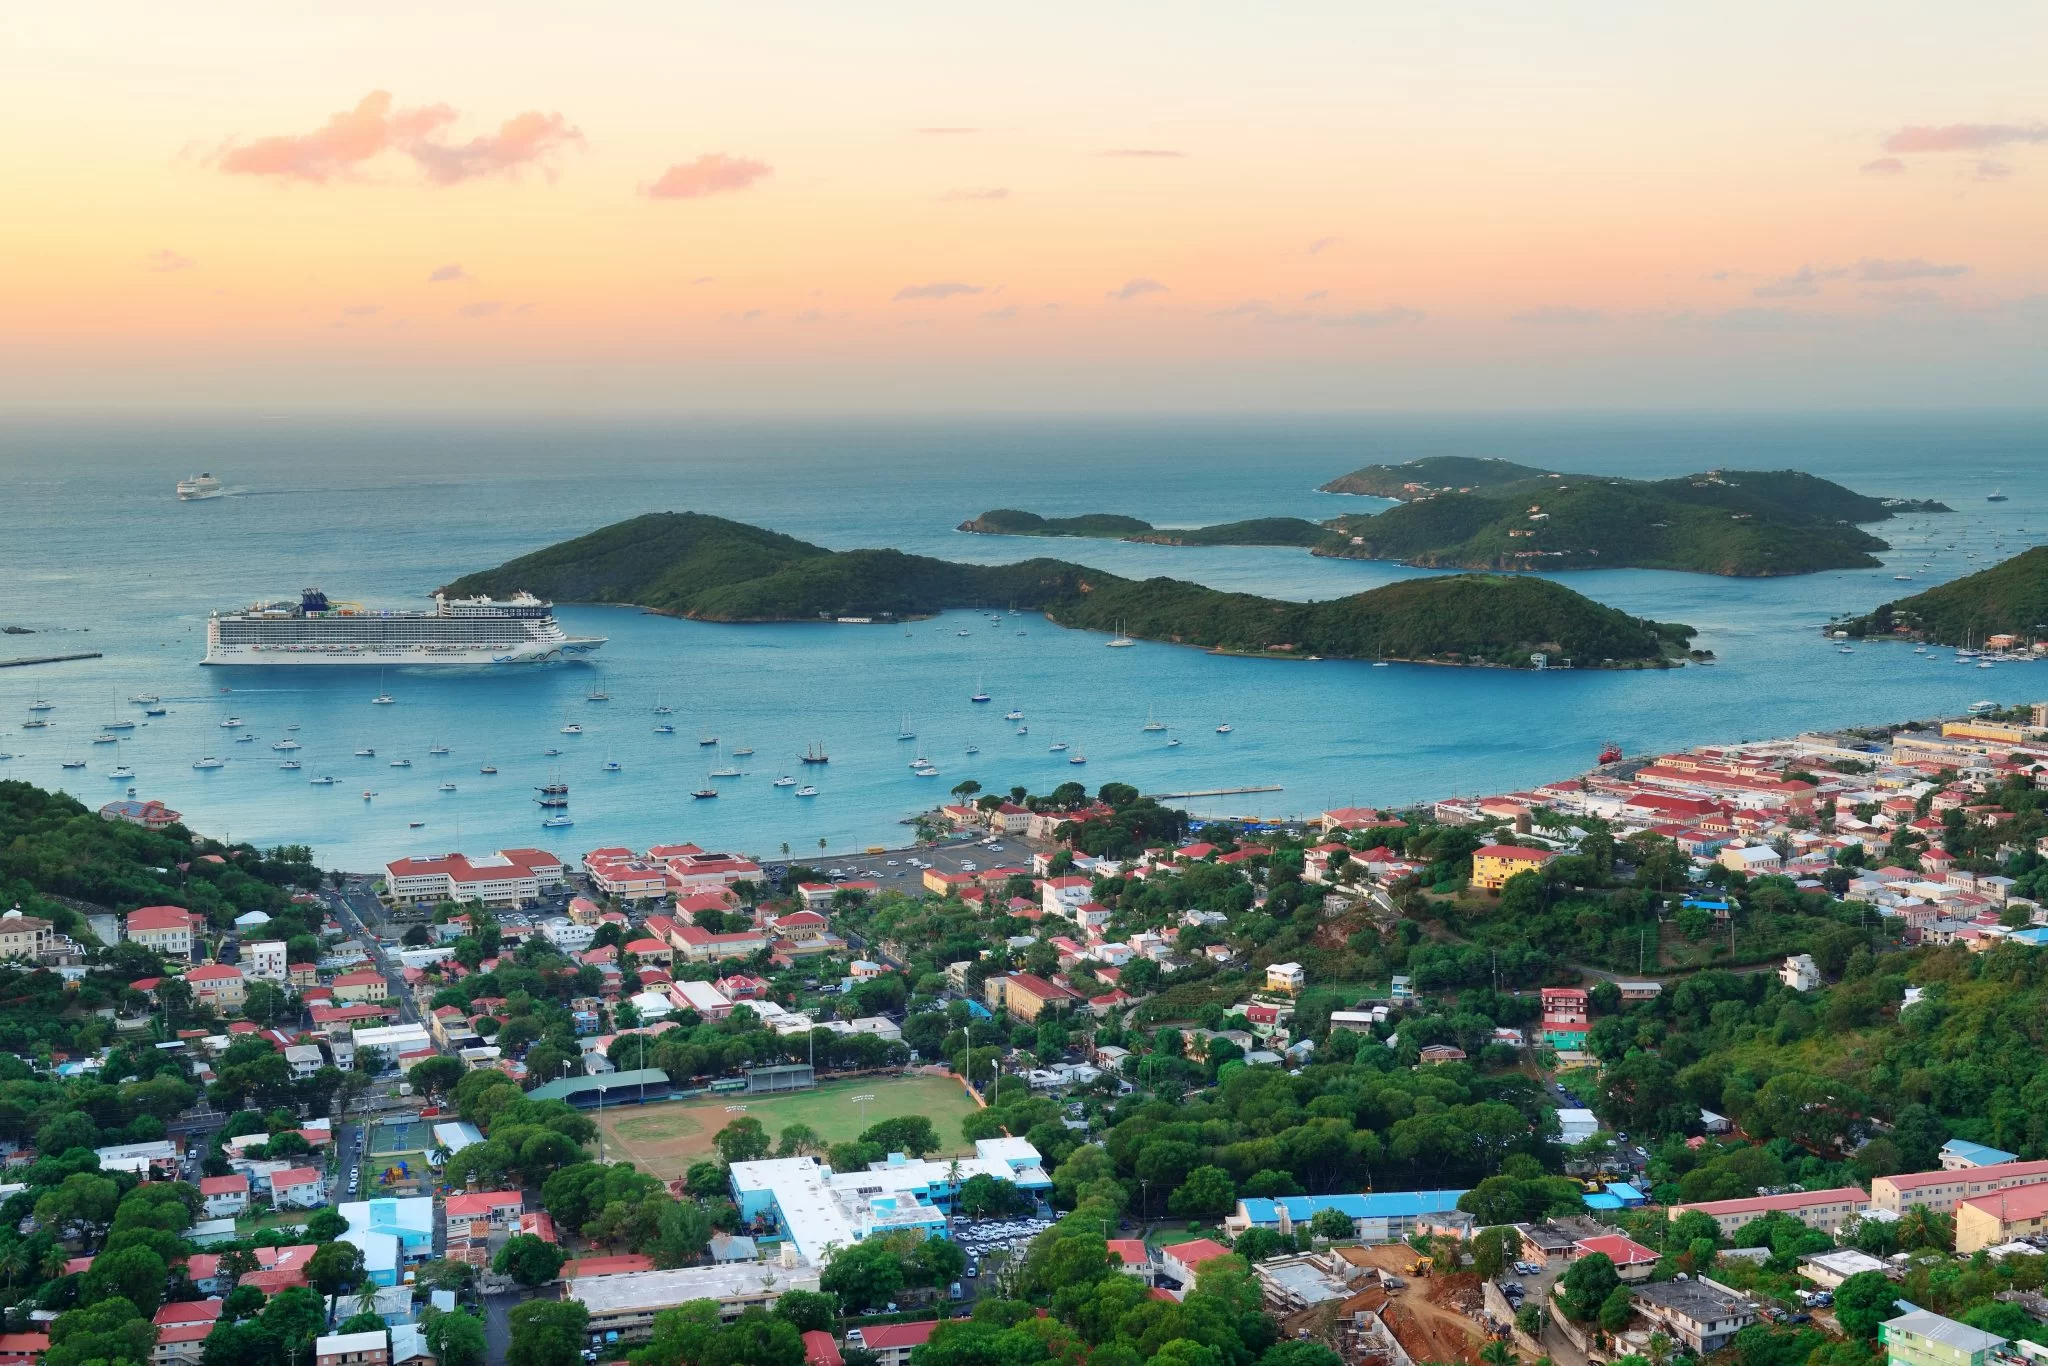 Cruise is coming to the St. Thomas Island